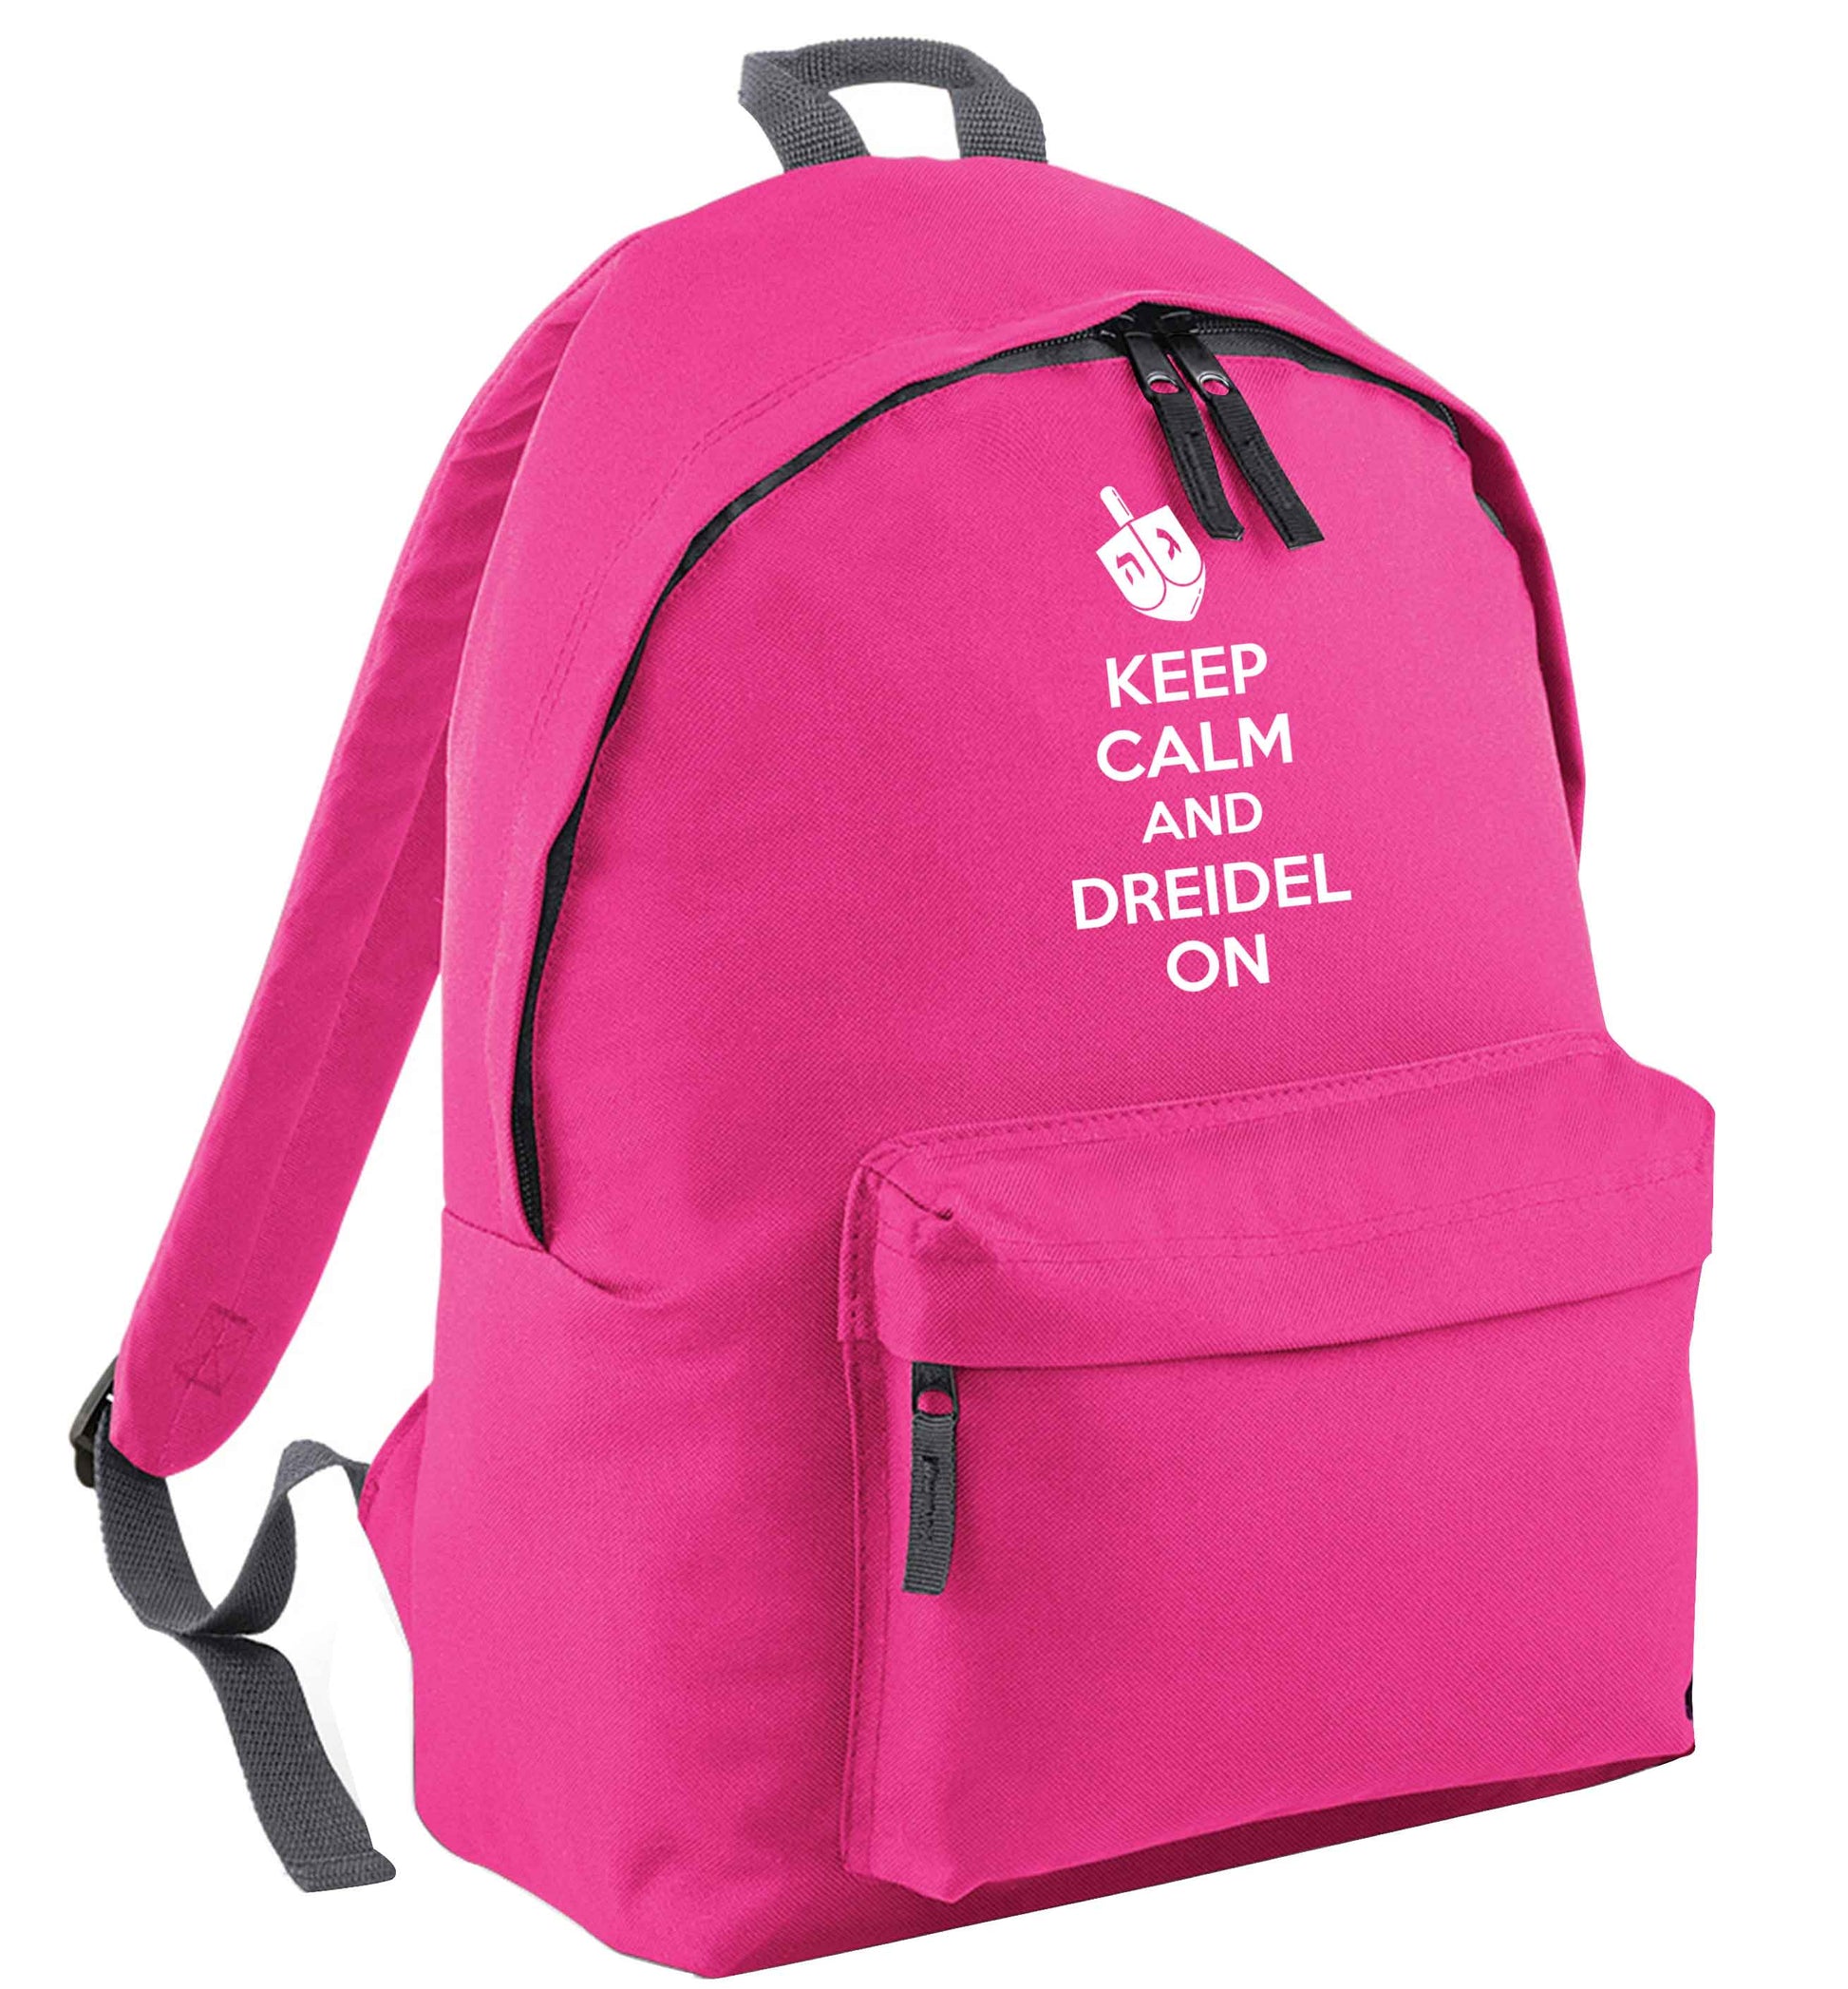 Keep calm and dreidel on pink adults backpack